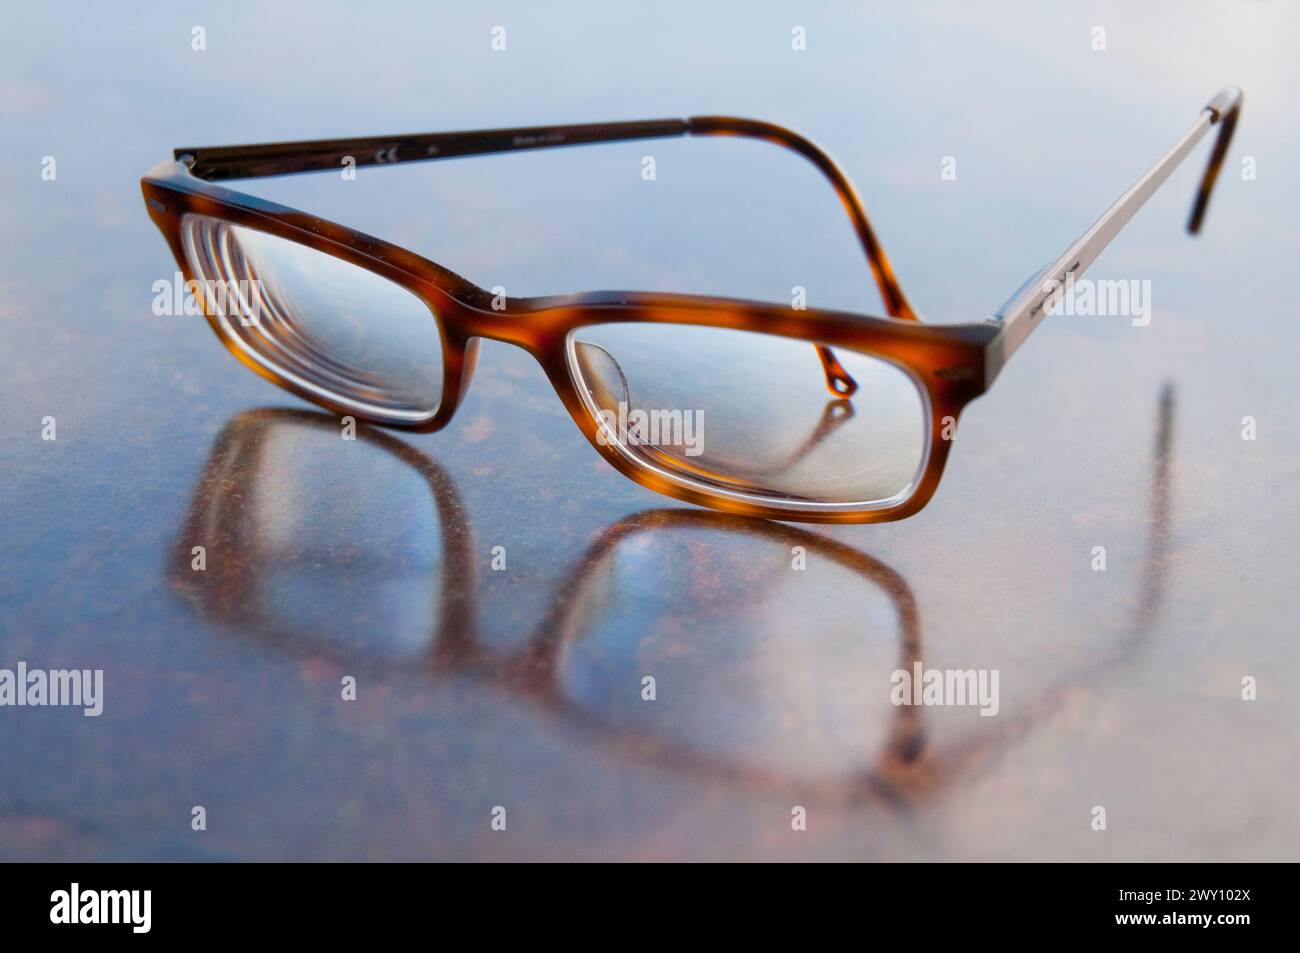 Spectacles and its reflection on marbre surface. Stock Photo